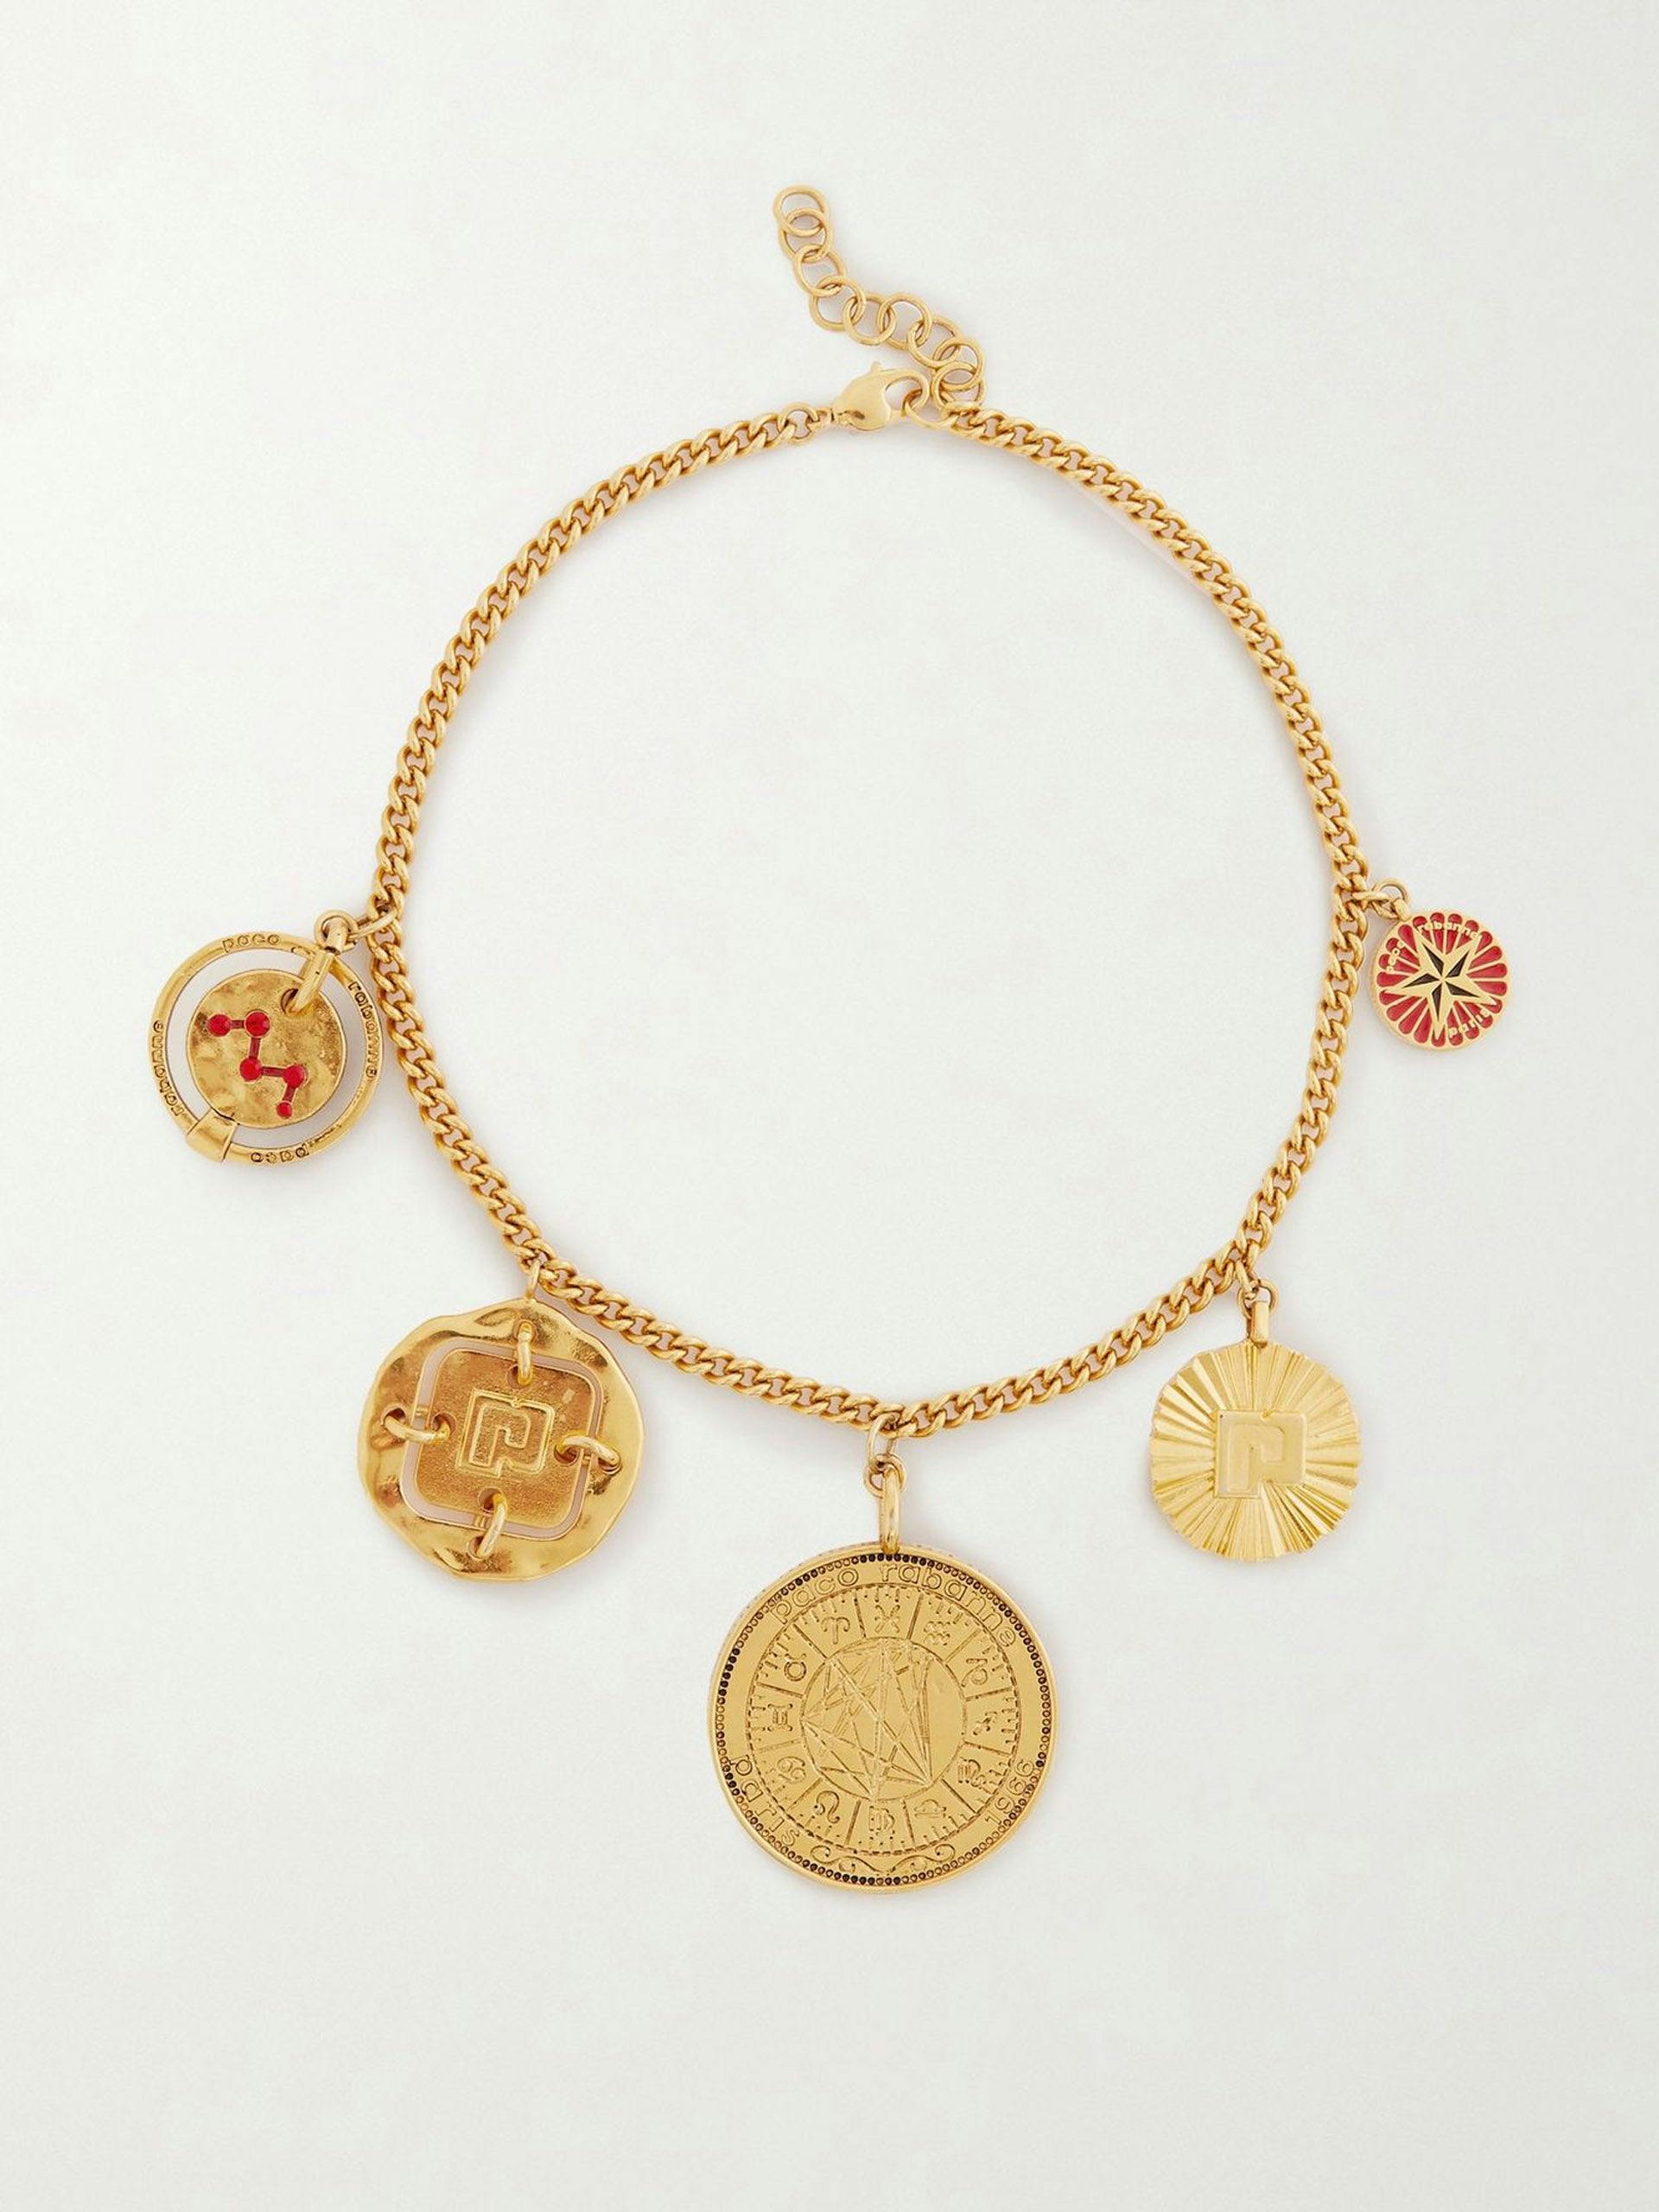 Gold-tone and enamel necklace